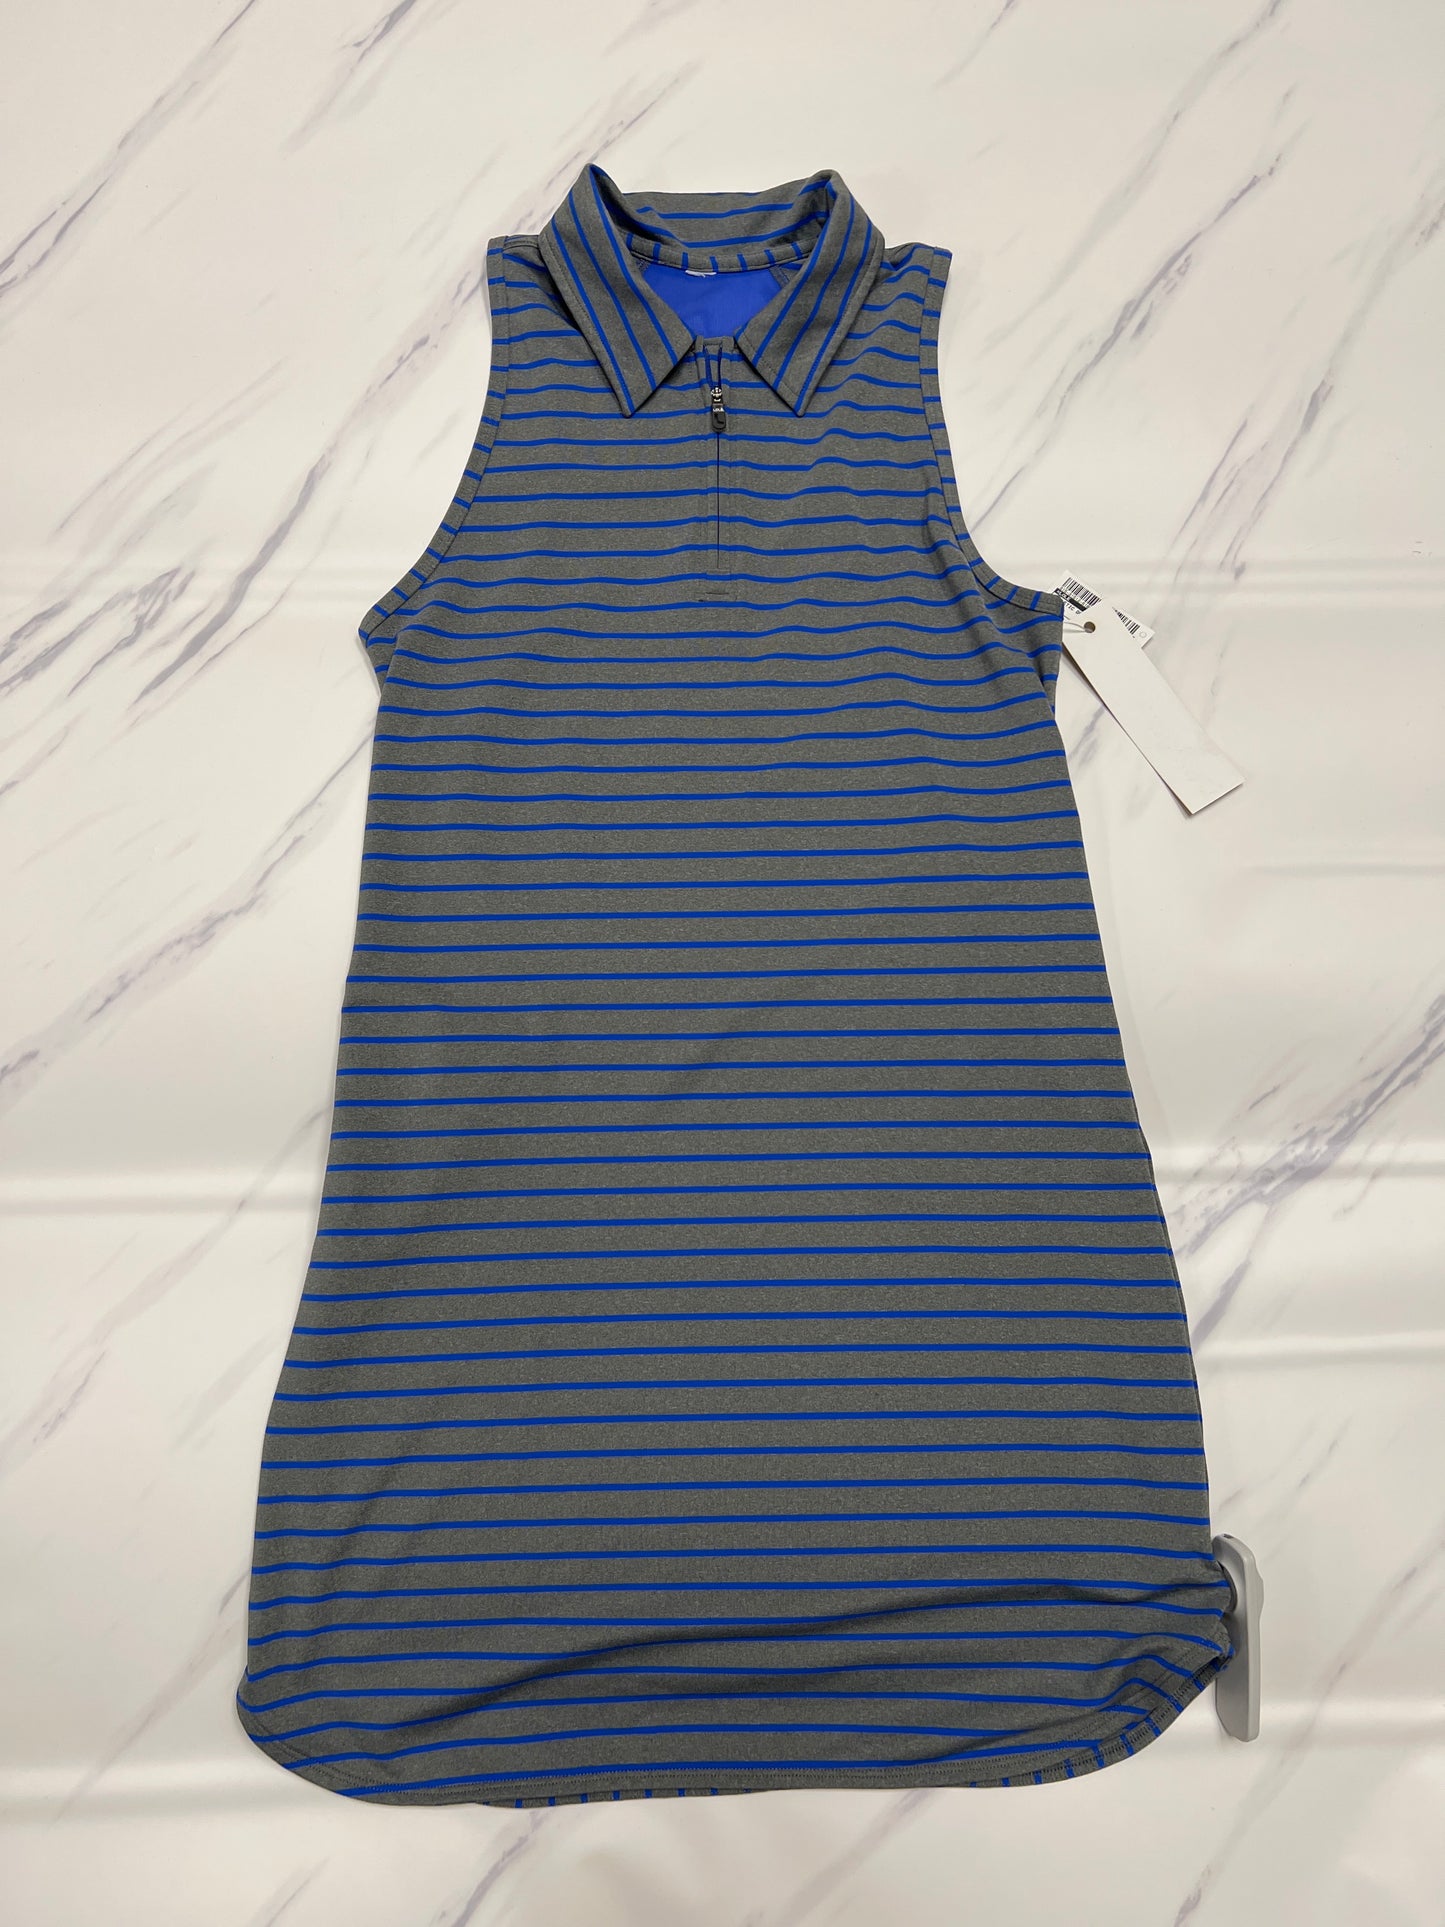 Athletic Dress By Lole  Size: Xs